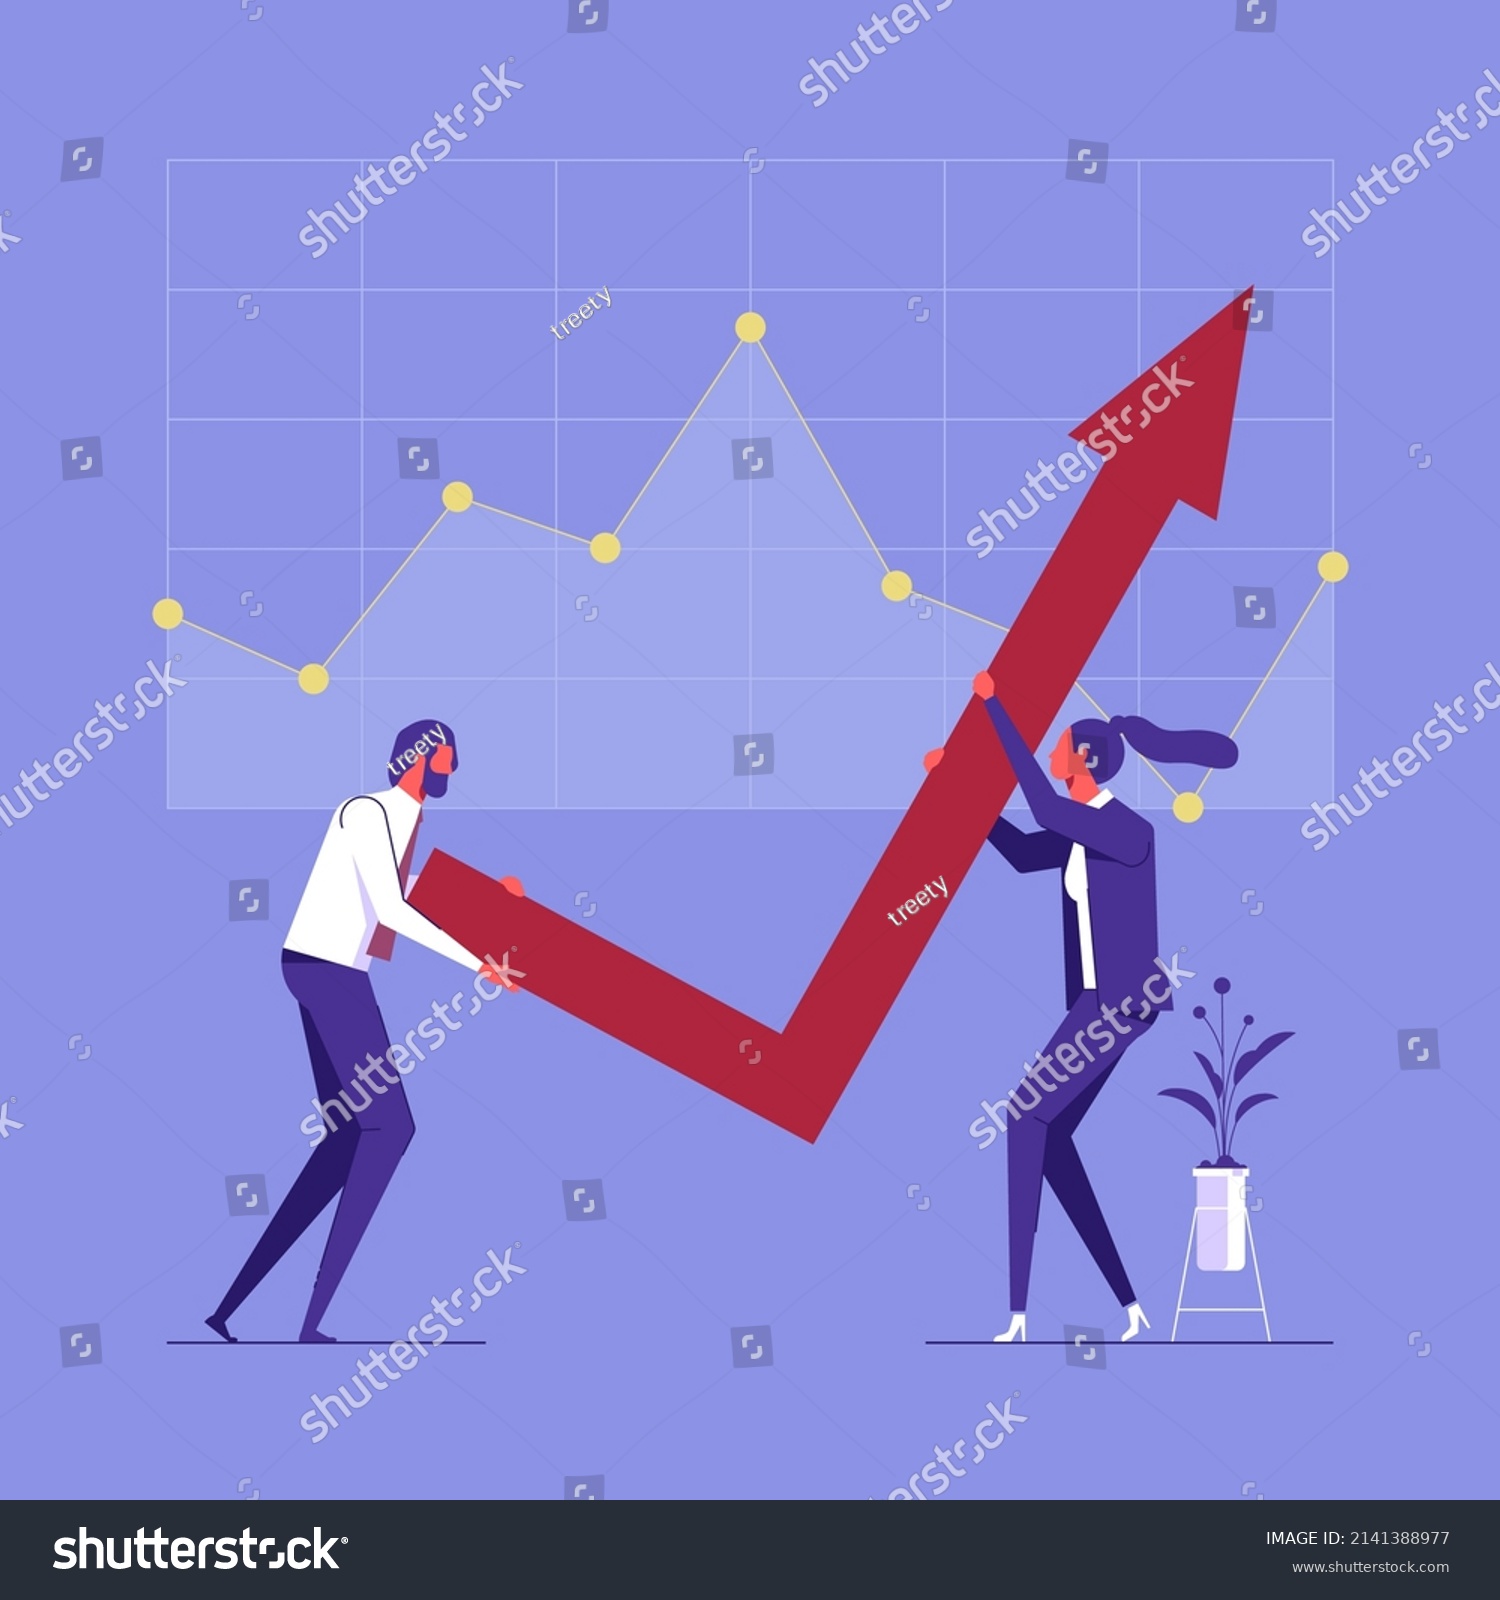 SVG of Businesspeople couple rising up growing arrow, teamwork, financial growth concept, business people correcting direction of arrow svg